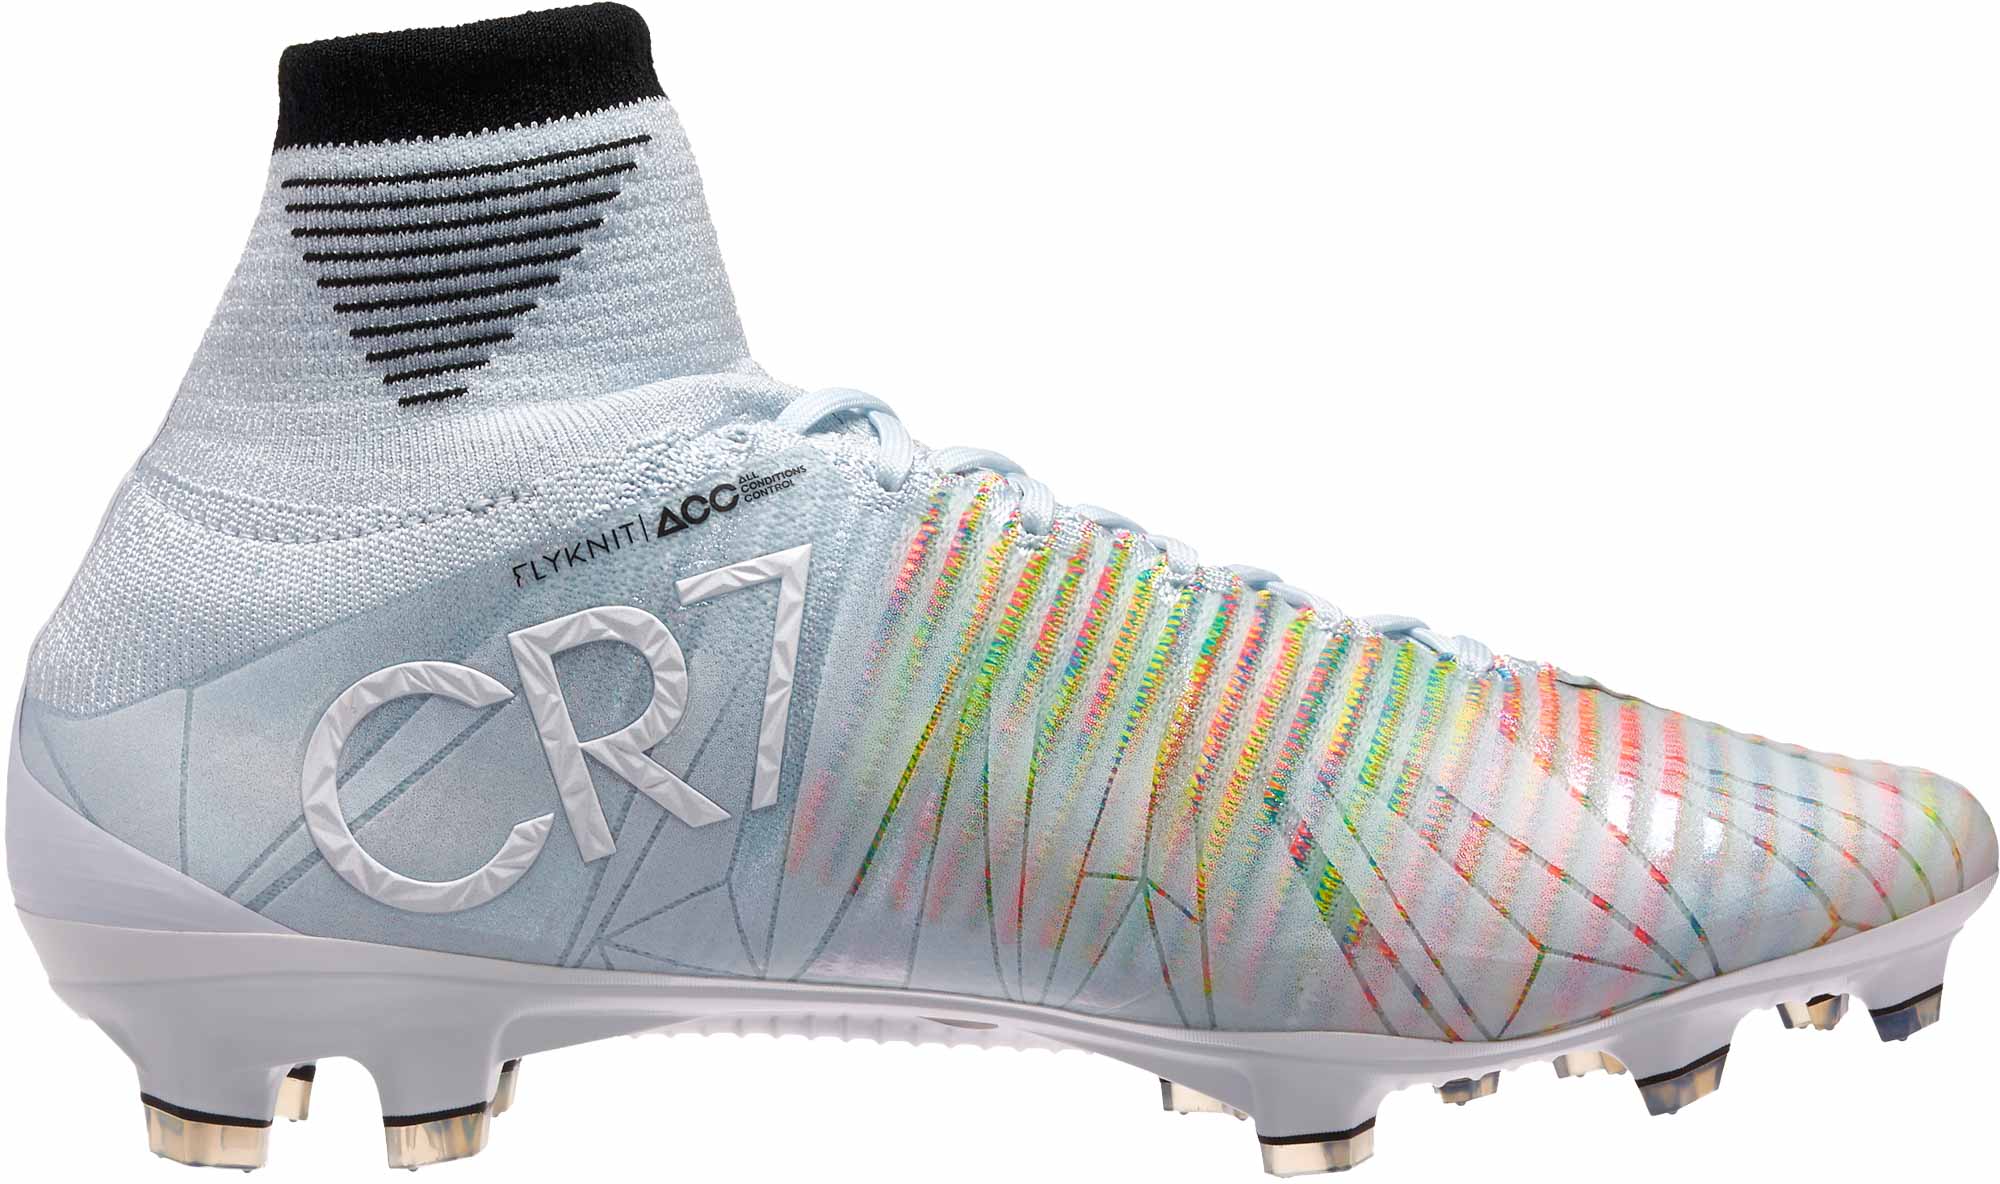 cr7 cleats black and blue